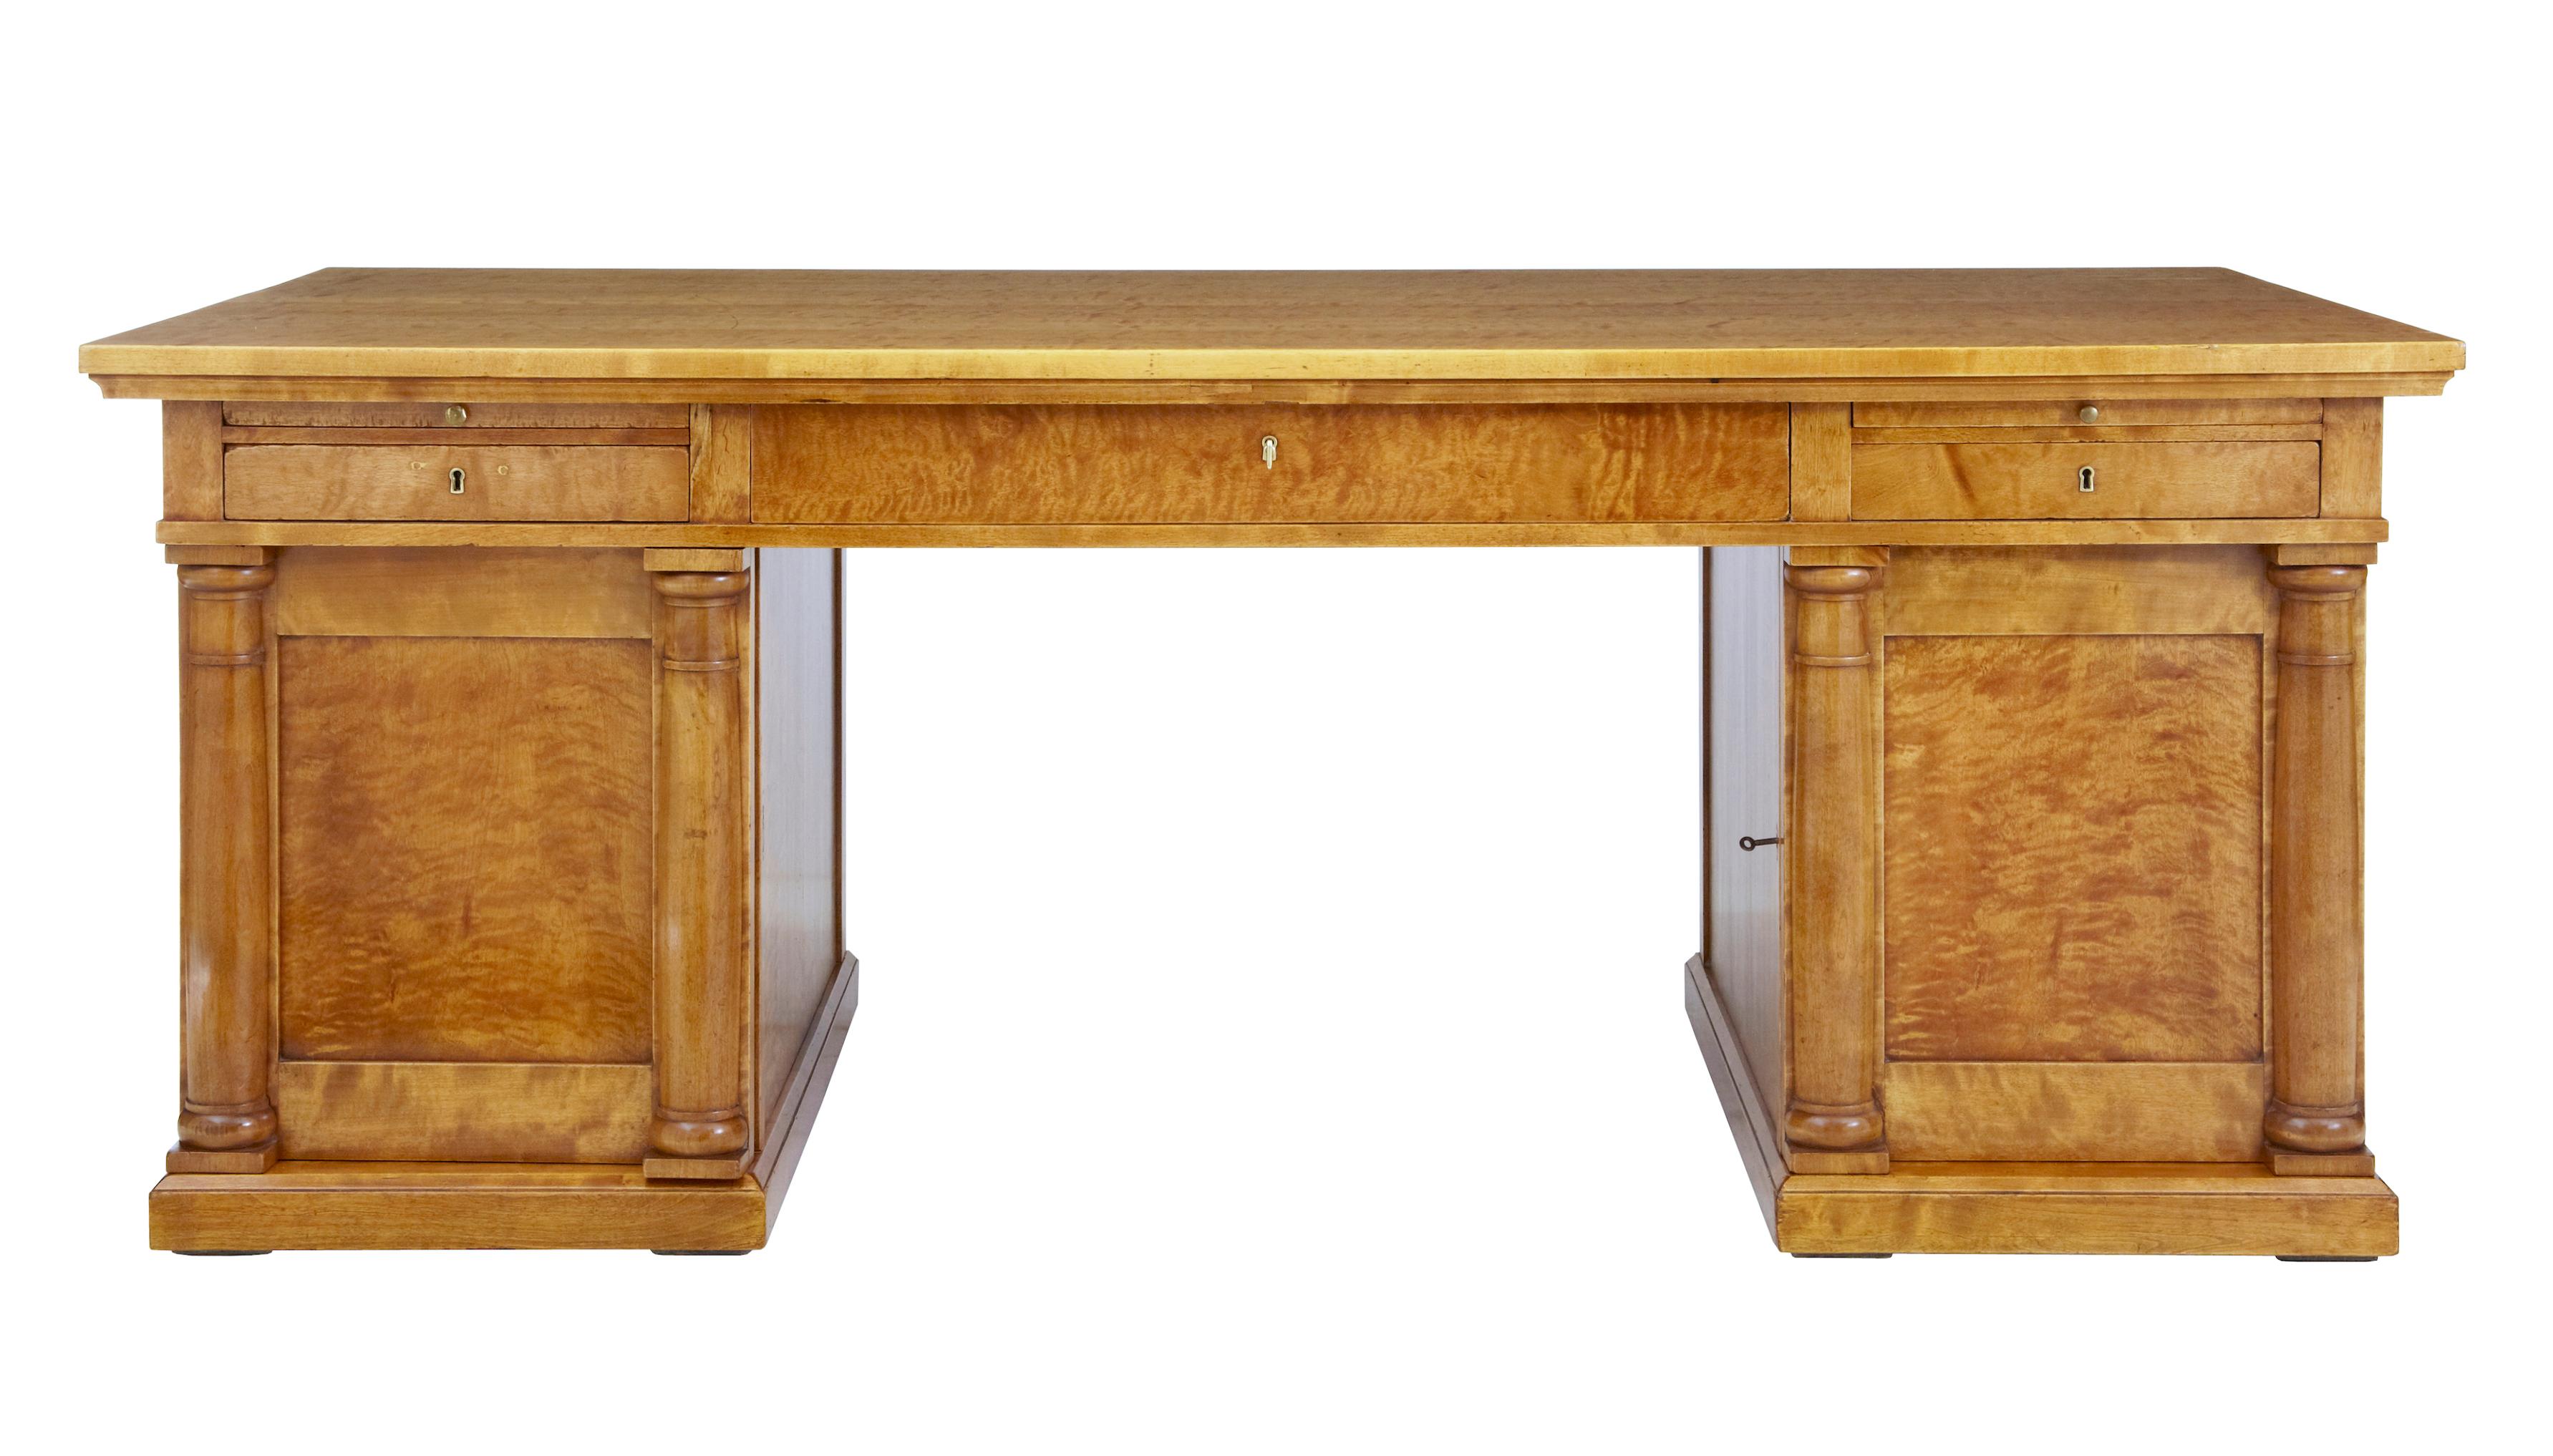 Impressive 19th century large Swedish empire birch desk circa 1880.

Fine quality empire revival desk of large proportions circa 1880. Consisting of 3 parts, top and 2 pedestals. 

Large architectural top with a drawer and brushing slide on